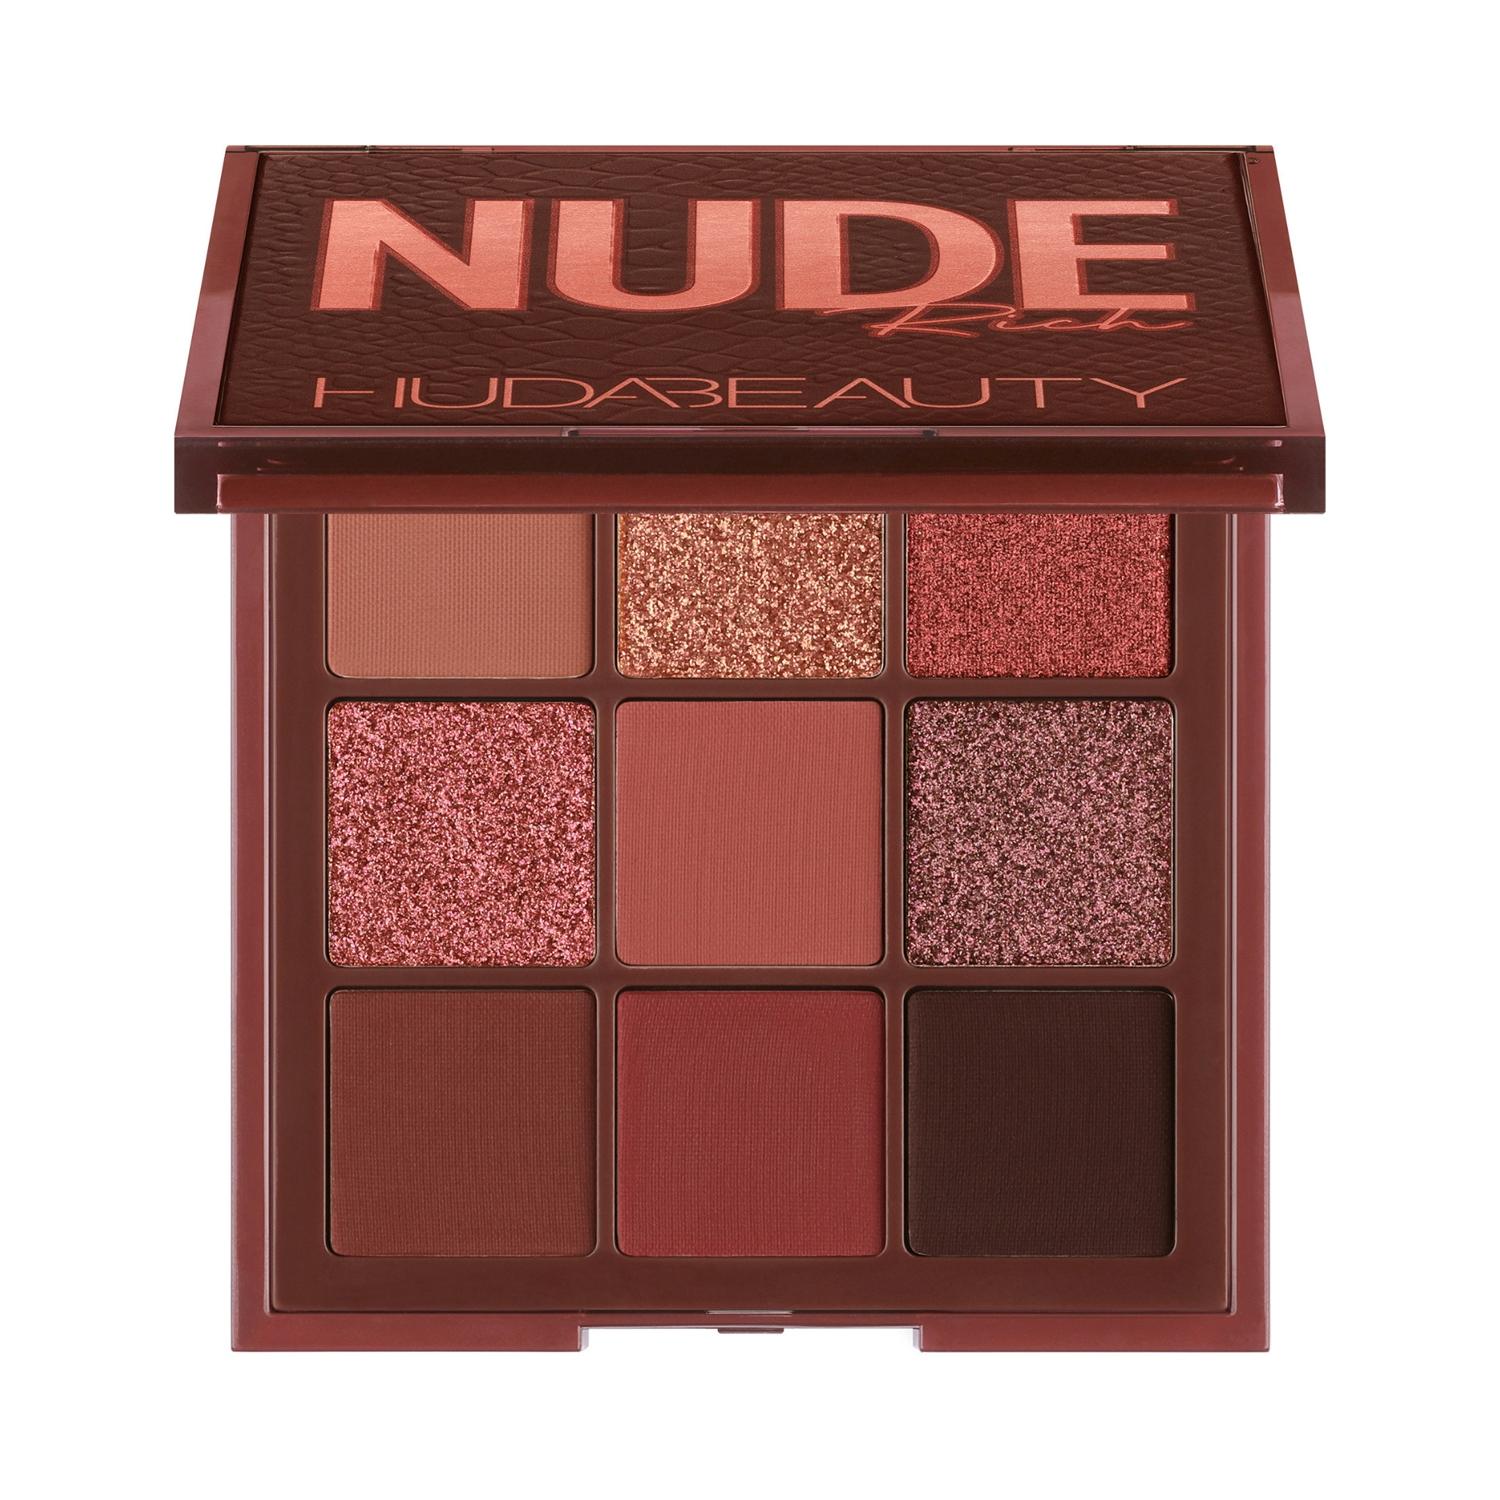 huda beauty nude obsessions eye shadow palette - rich (9.9g)